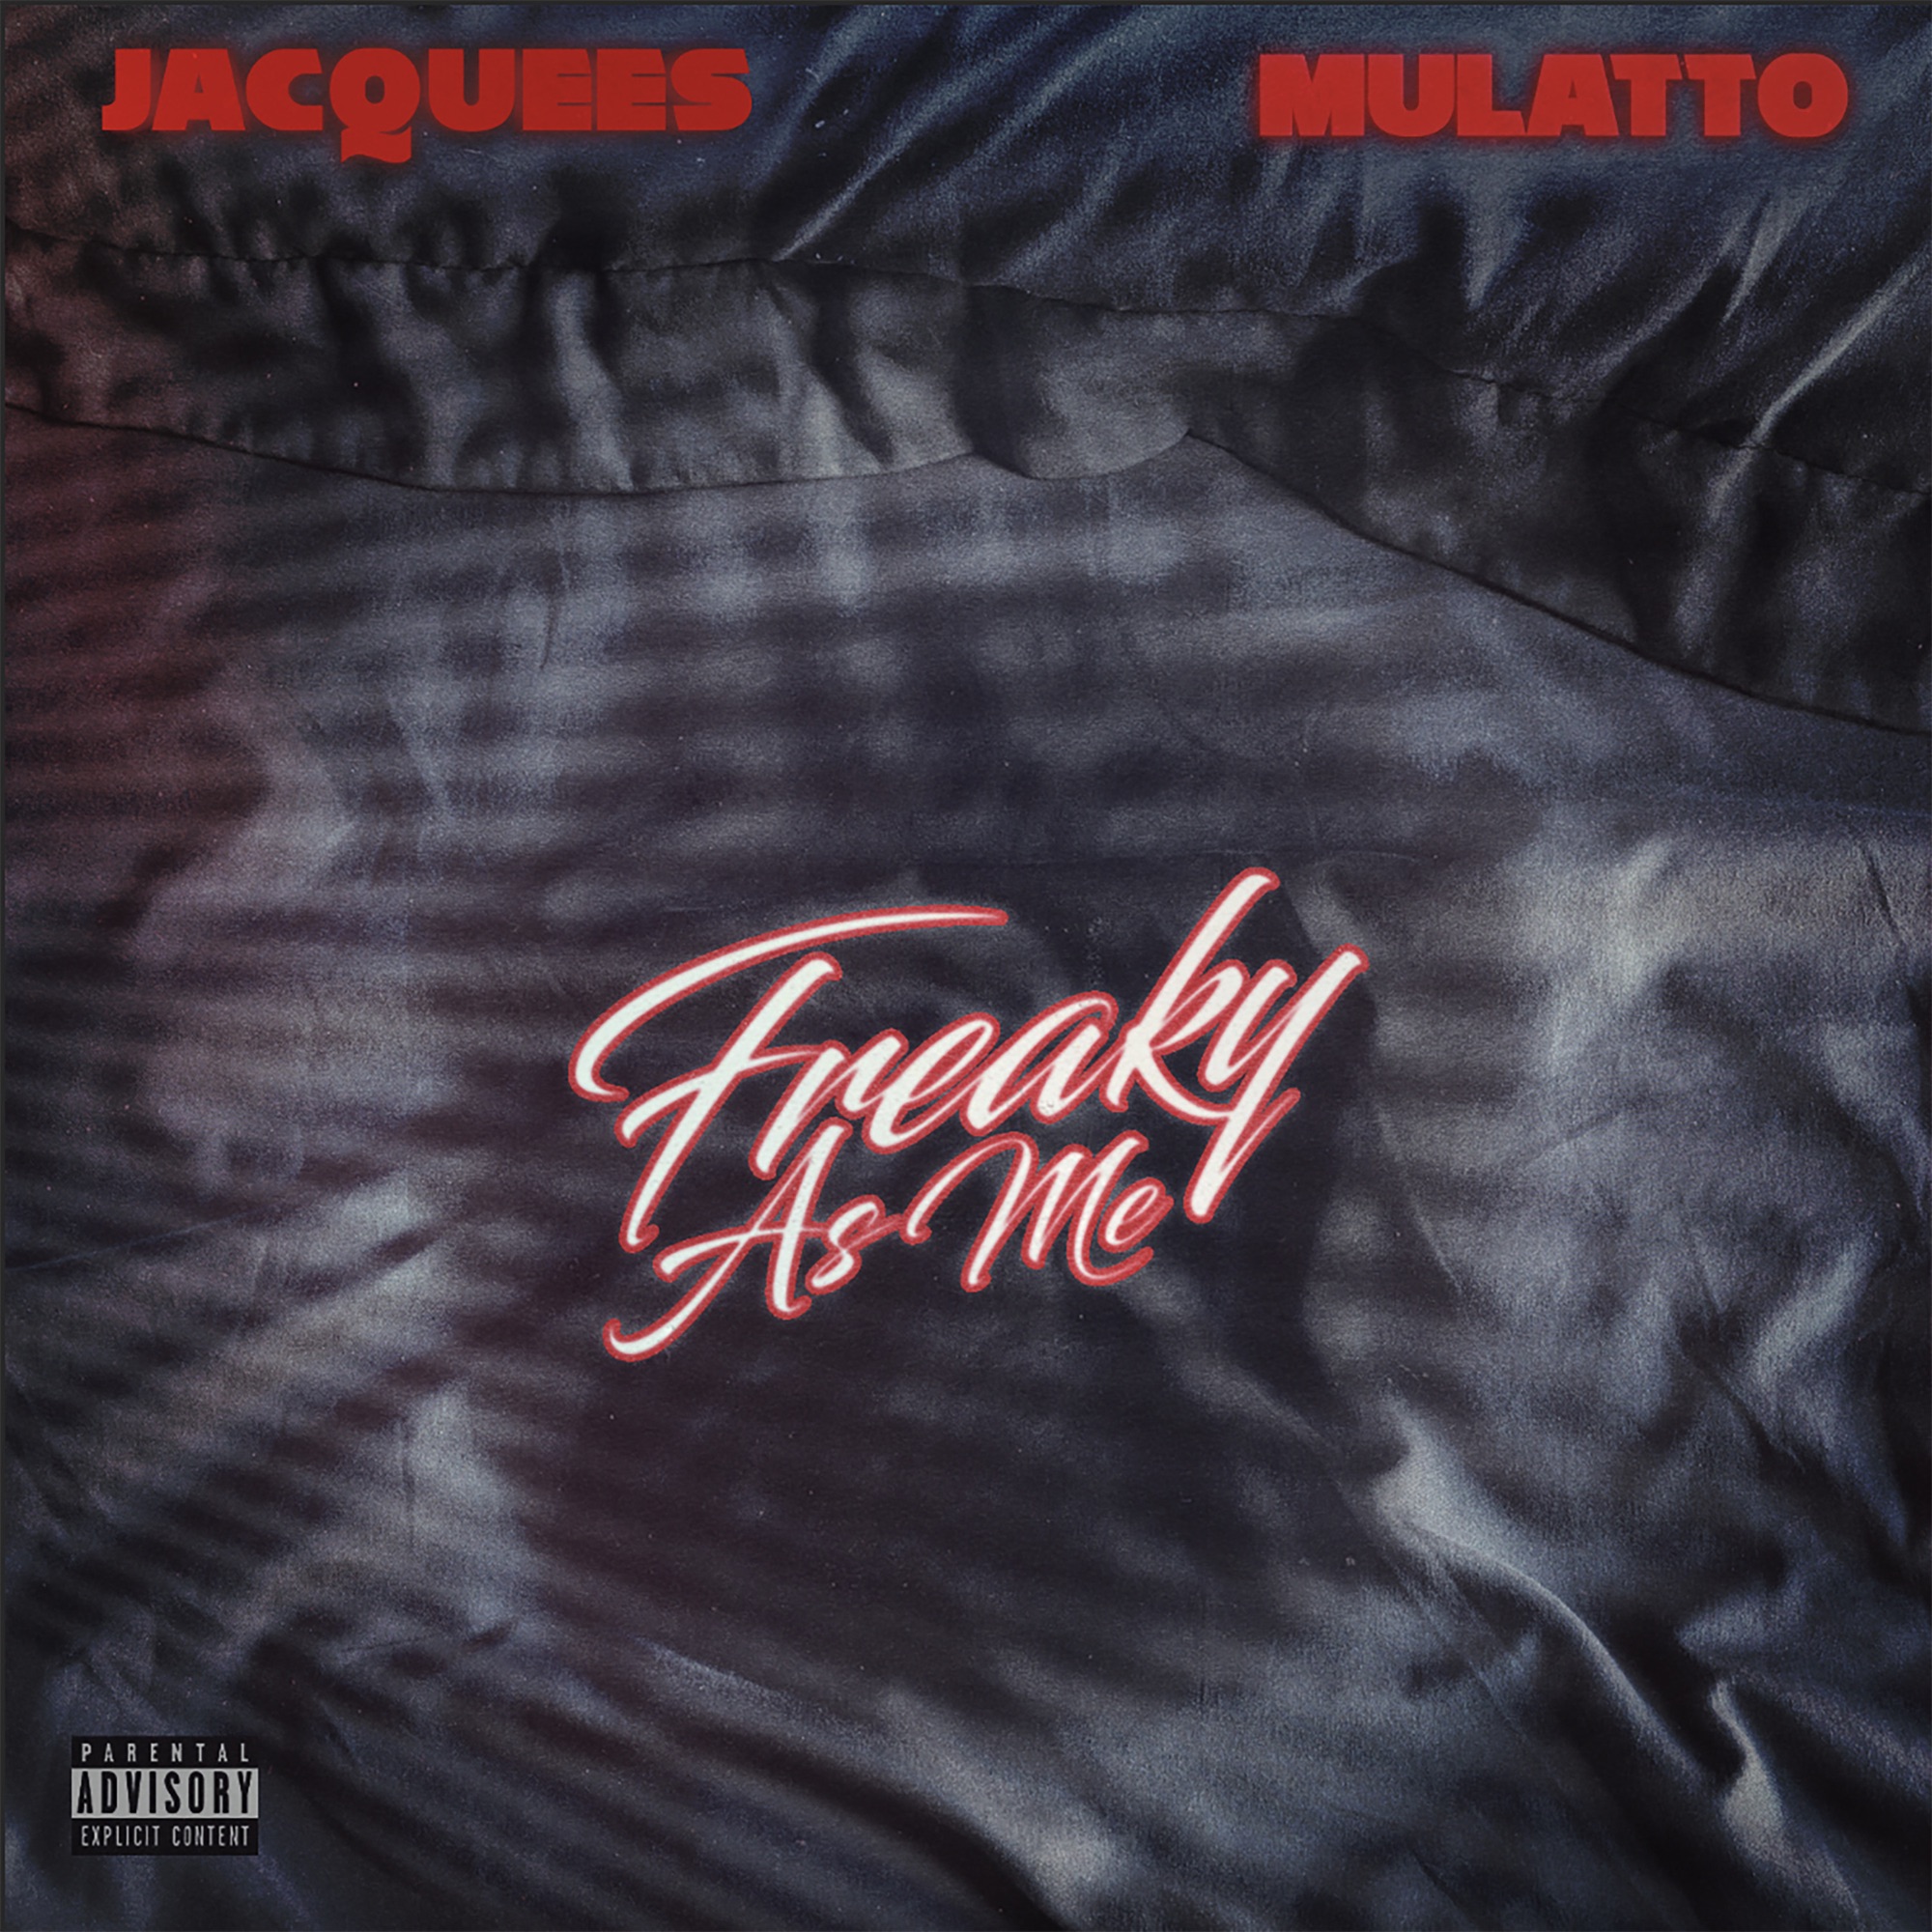 Jacquees - Freaky As Me (feat. Mulatto) - Single